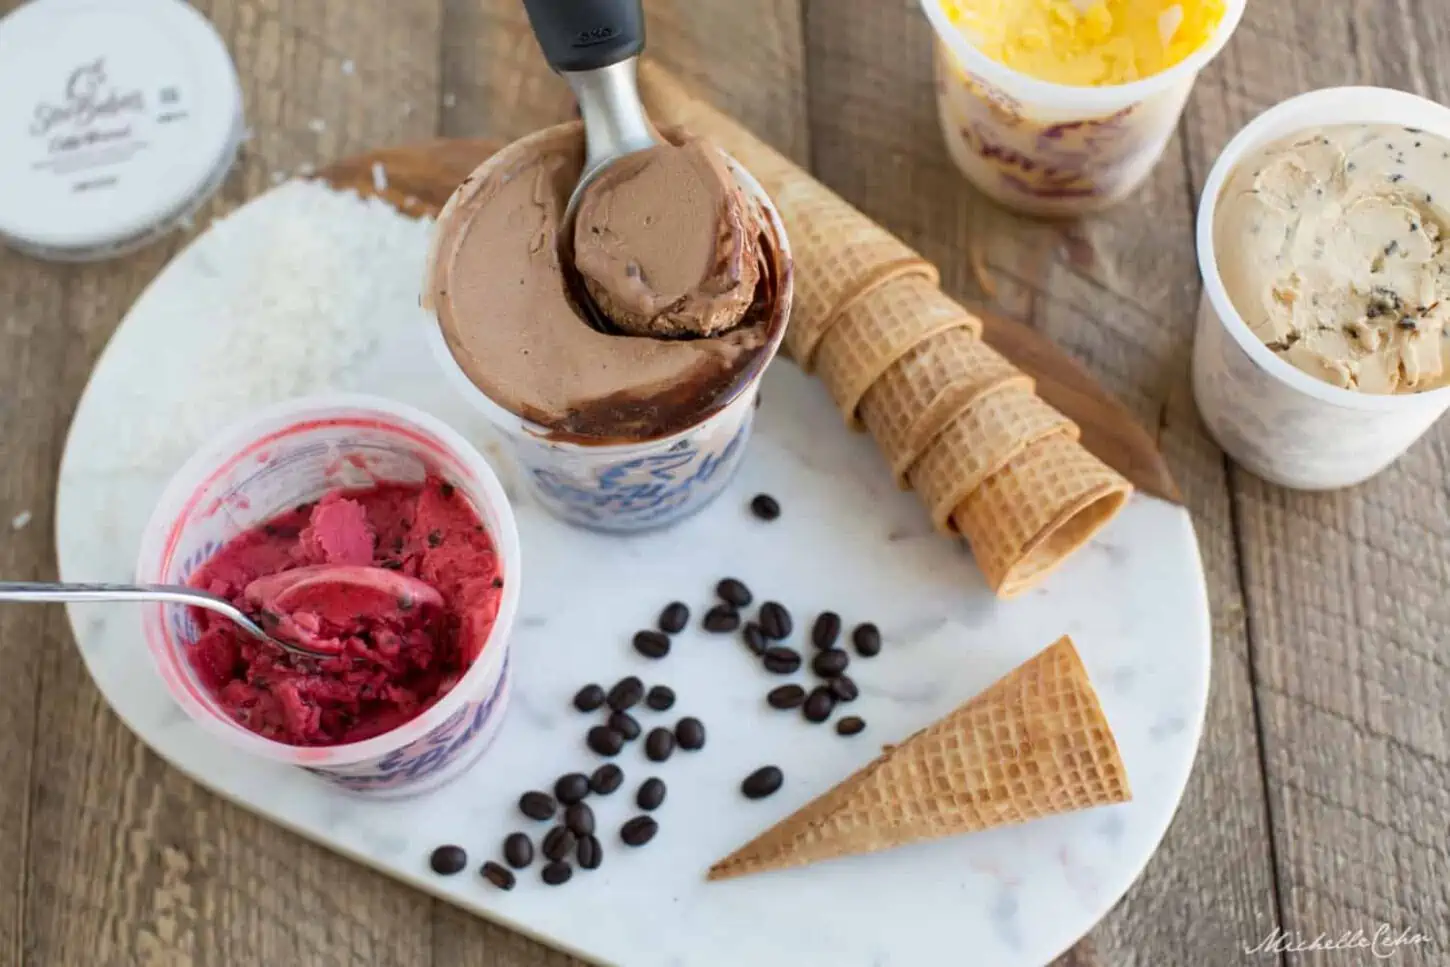 Pints of dairy-free ice cream with waffle cones.